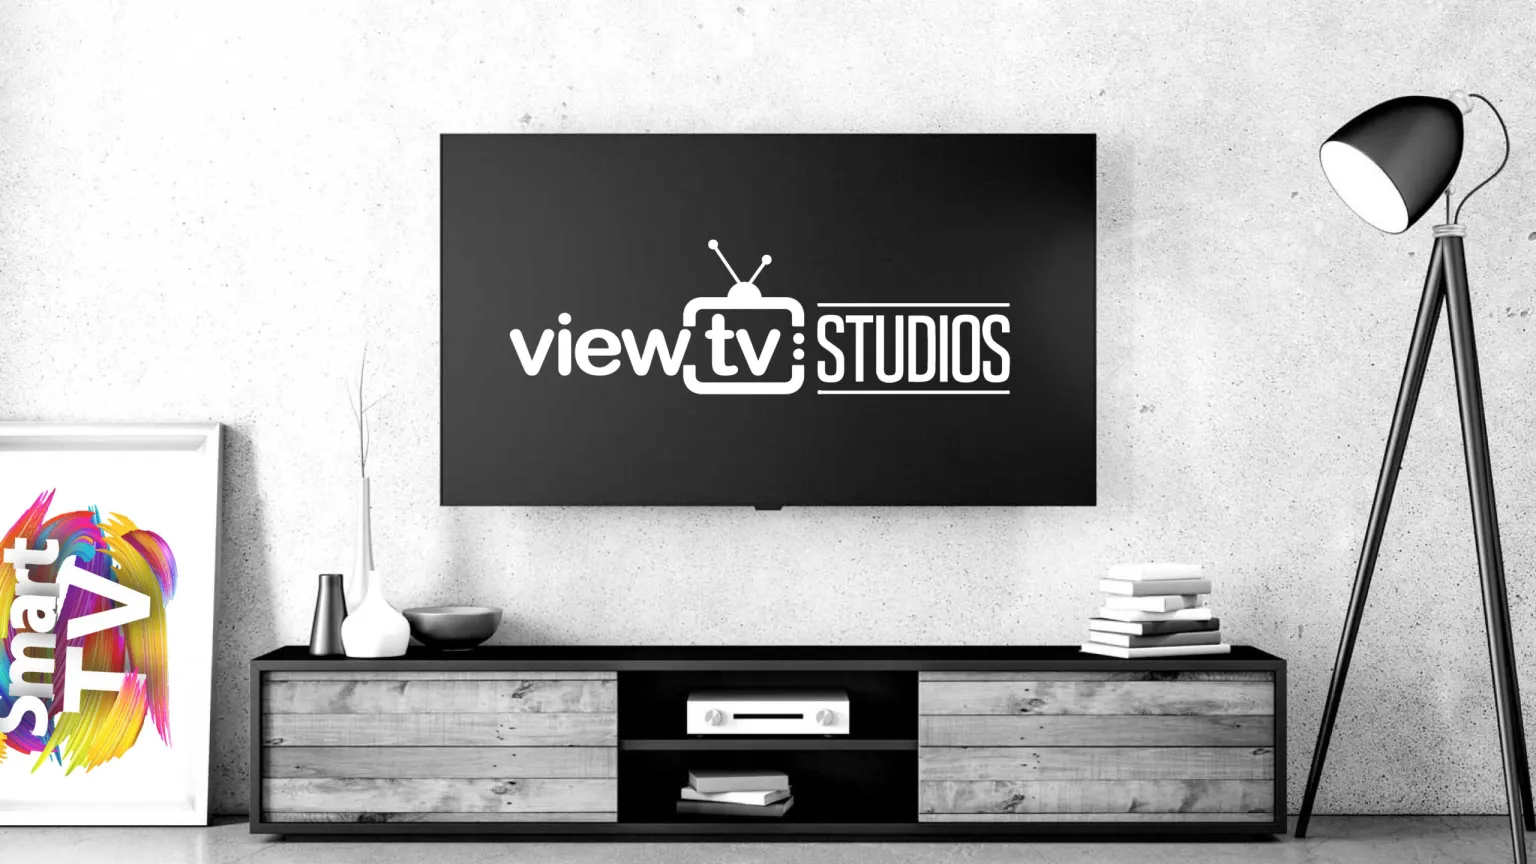 View TV Studios is the enabler for studios and content creators